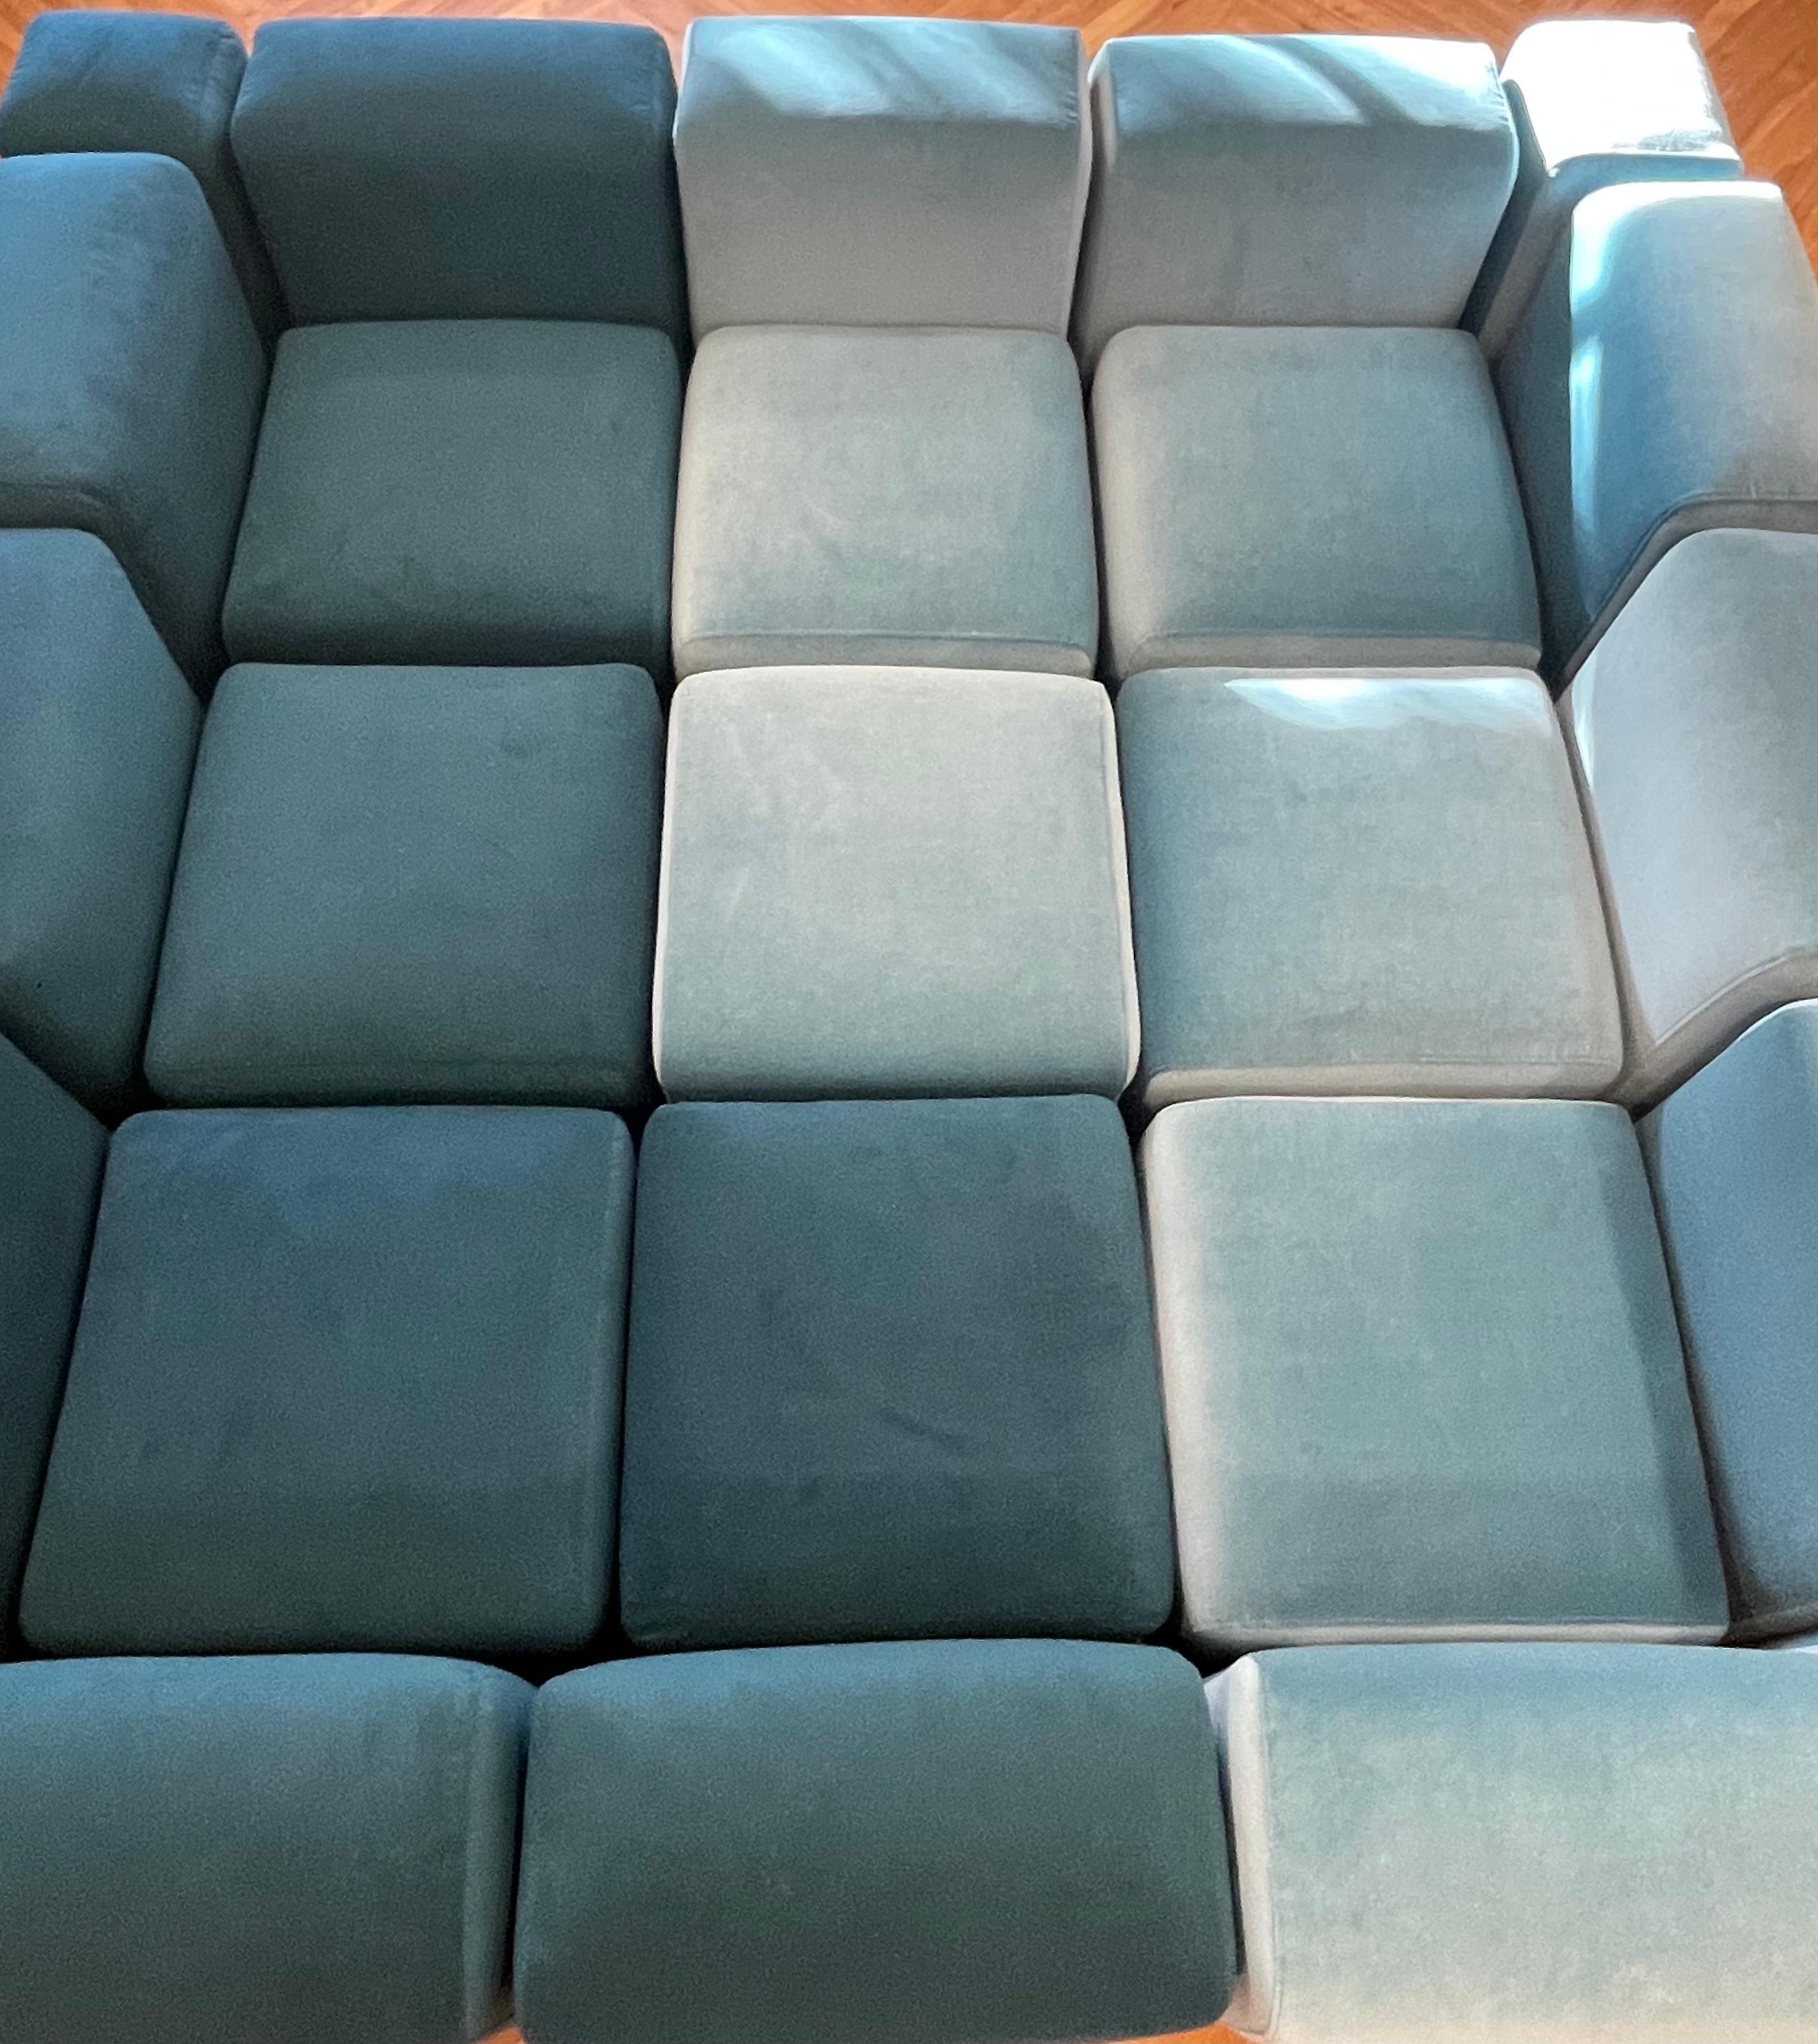 Rare massive 26 piece set. 13 backrests, 9 seats, and 4 corner pieces all with new foam reupholstered in 2 shades of blue mohair. 

Can be connected in any direction or formation using a series of chrome U-hooks (included) which hook into molds in